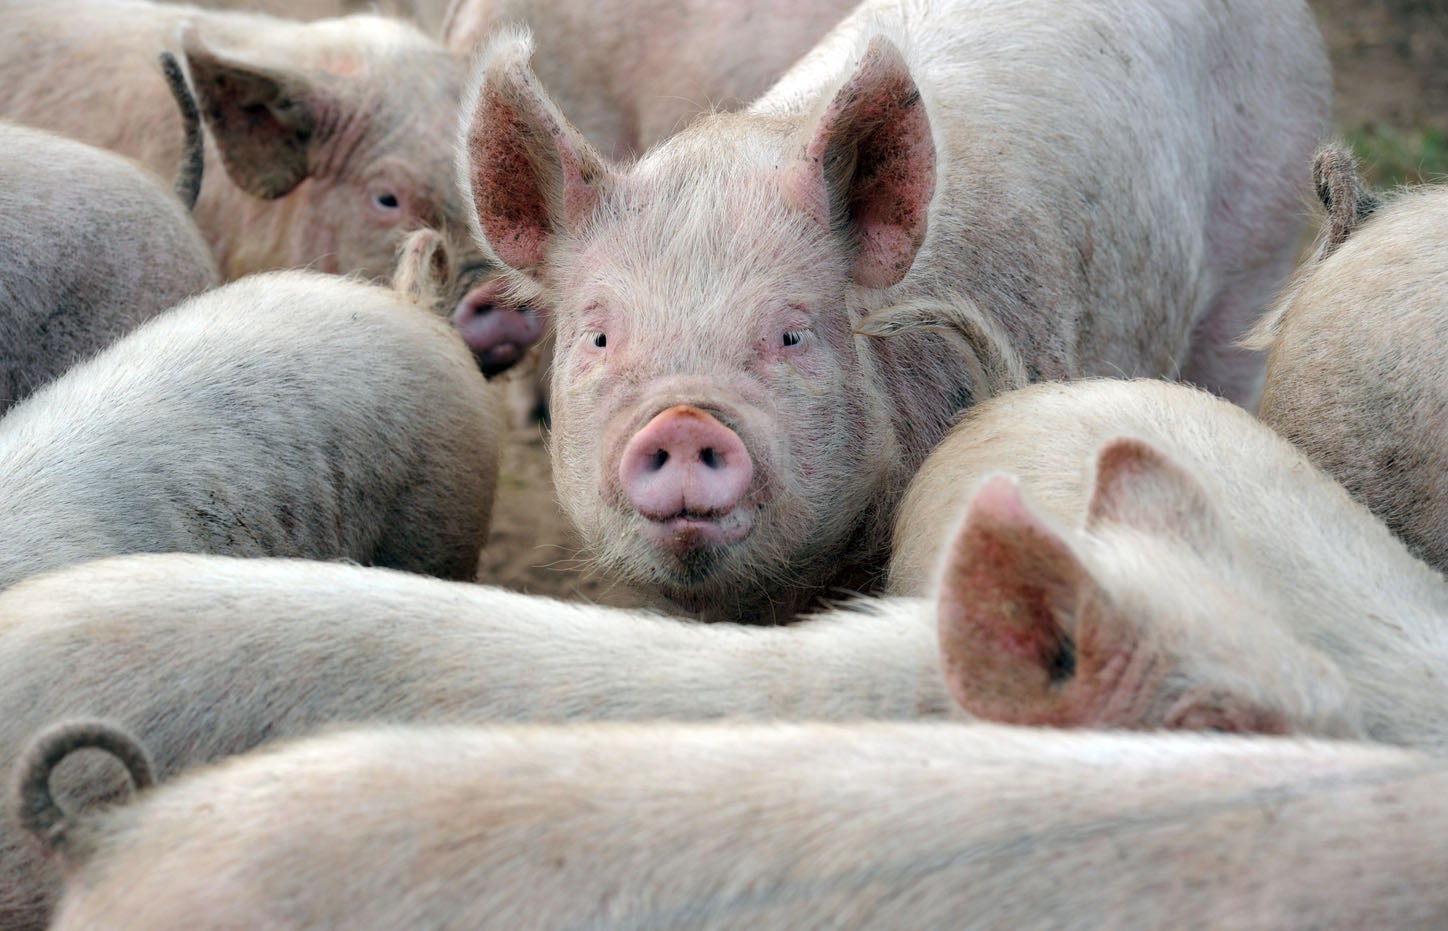 Around 70,000 pigs that should have been slaughtered remain on farms